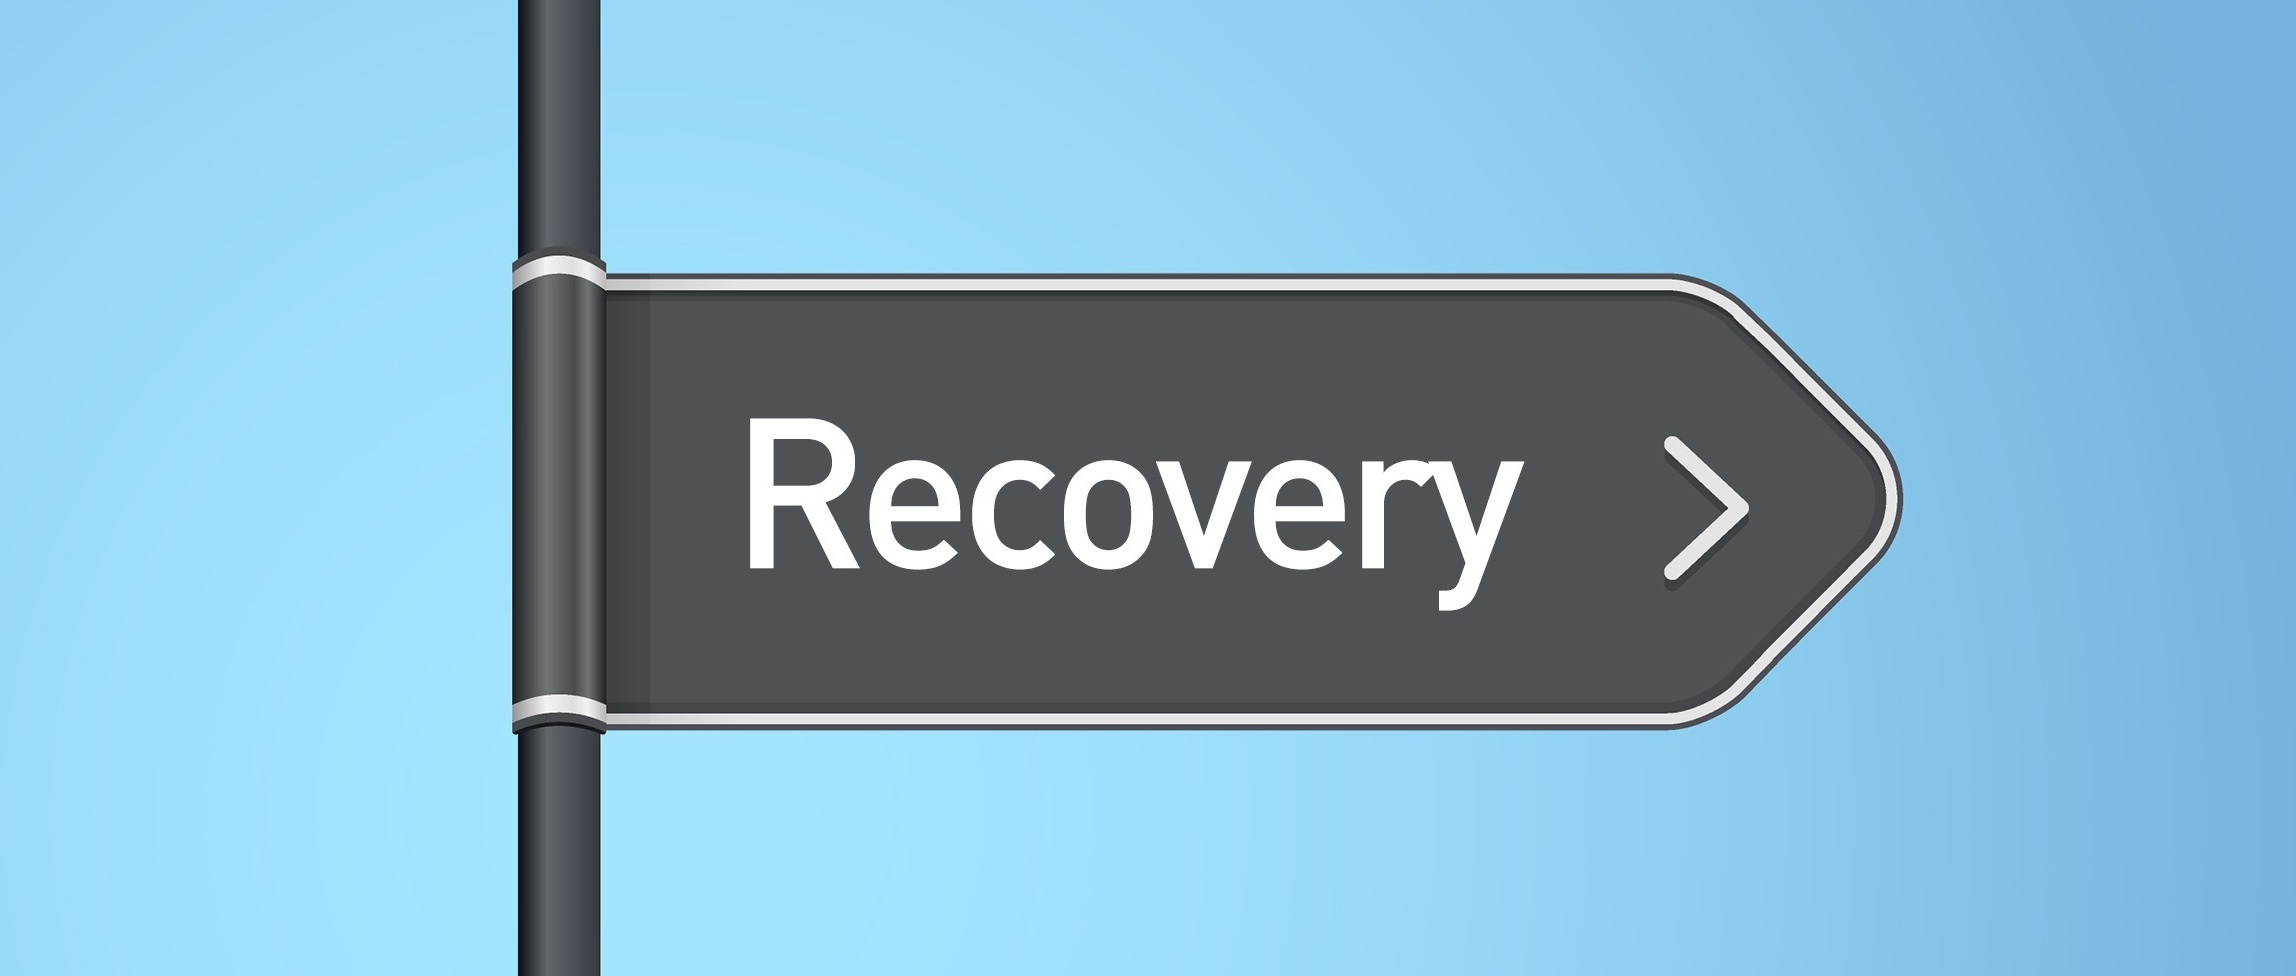 Recovery in bipolar disorder - NeuRA Library